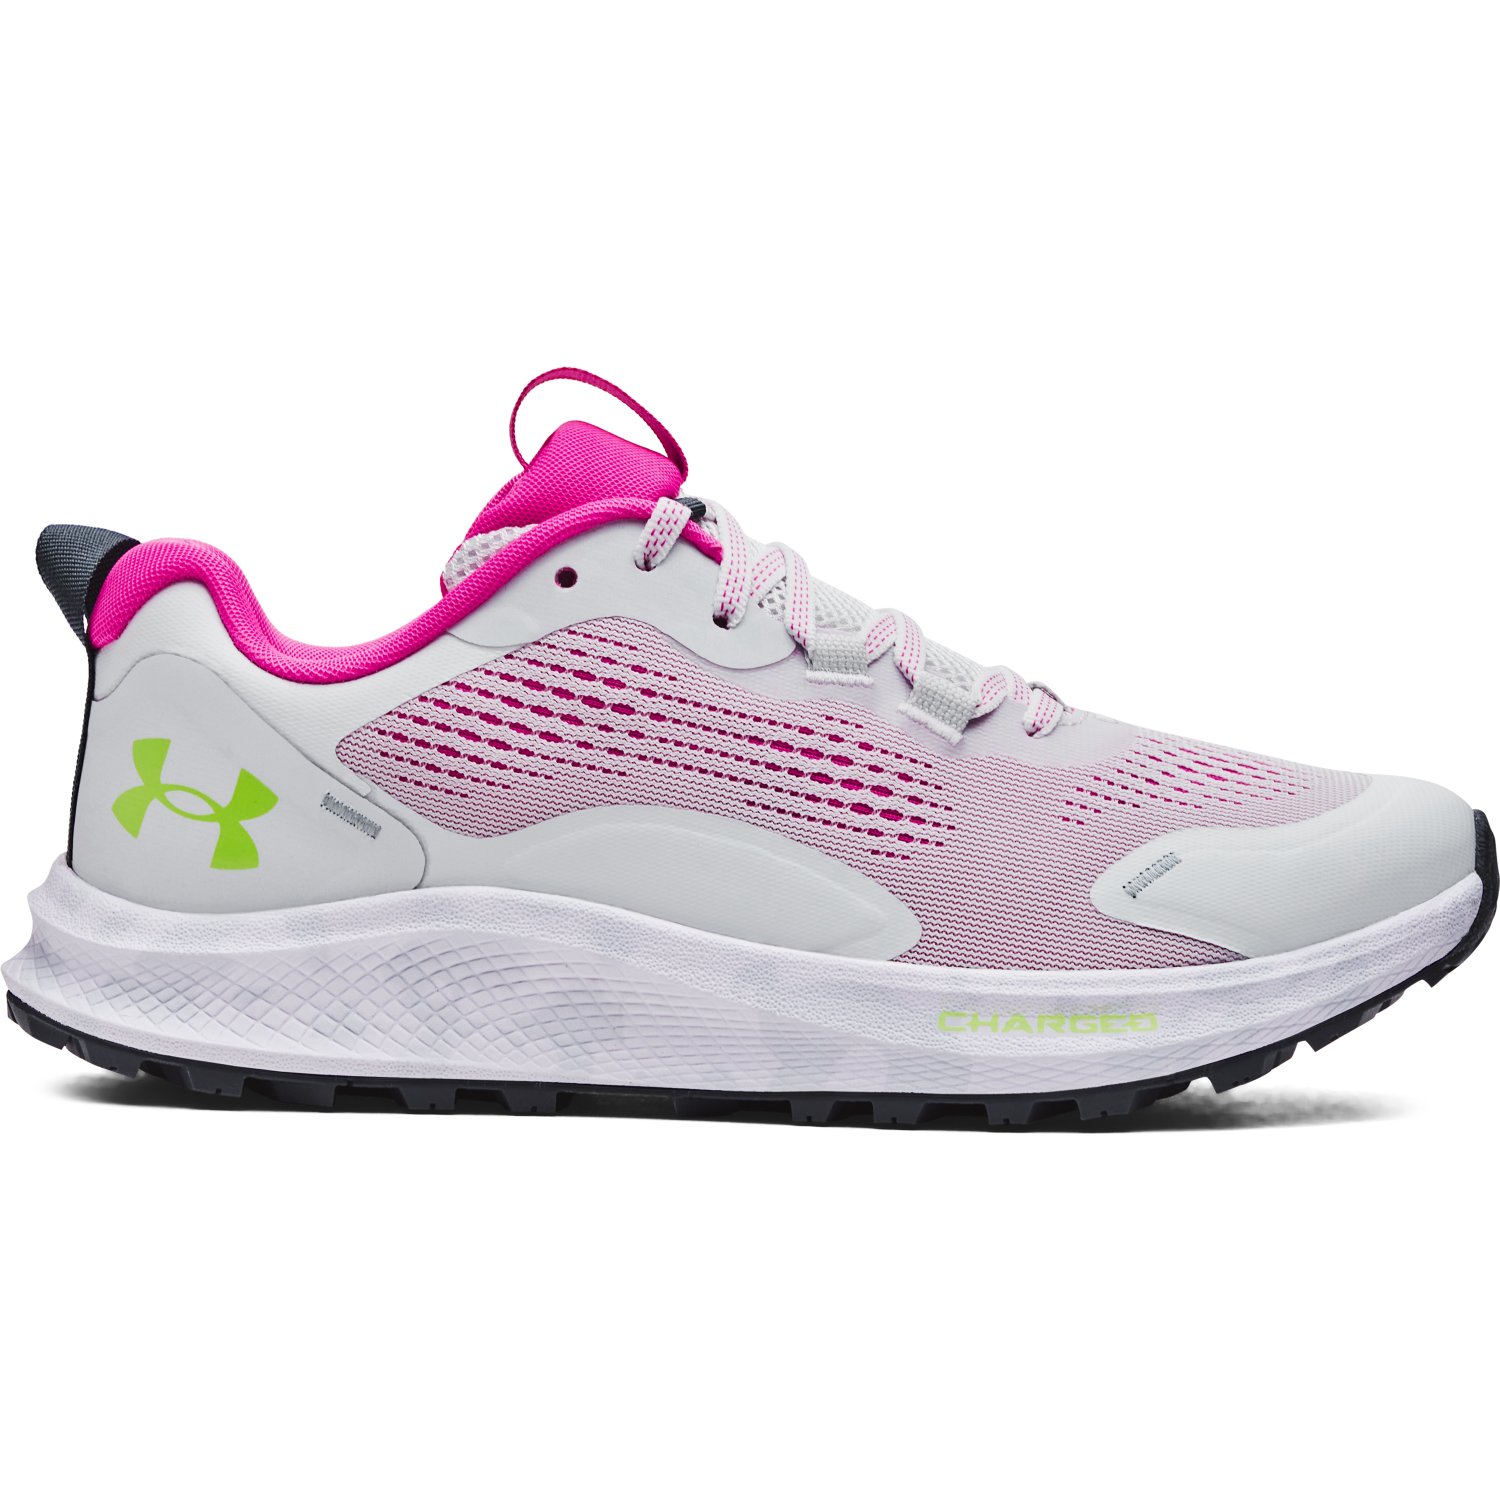 genéticamente Sumergir Andrew Halliday Women's UA Charged Bandit Trail 2 Running Shoes | Under Armour